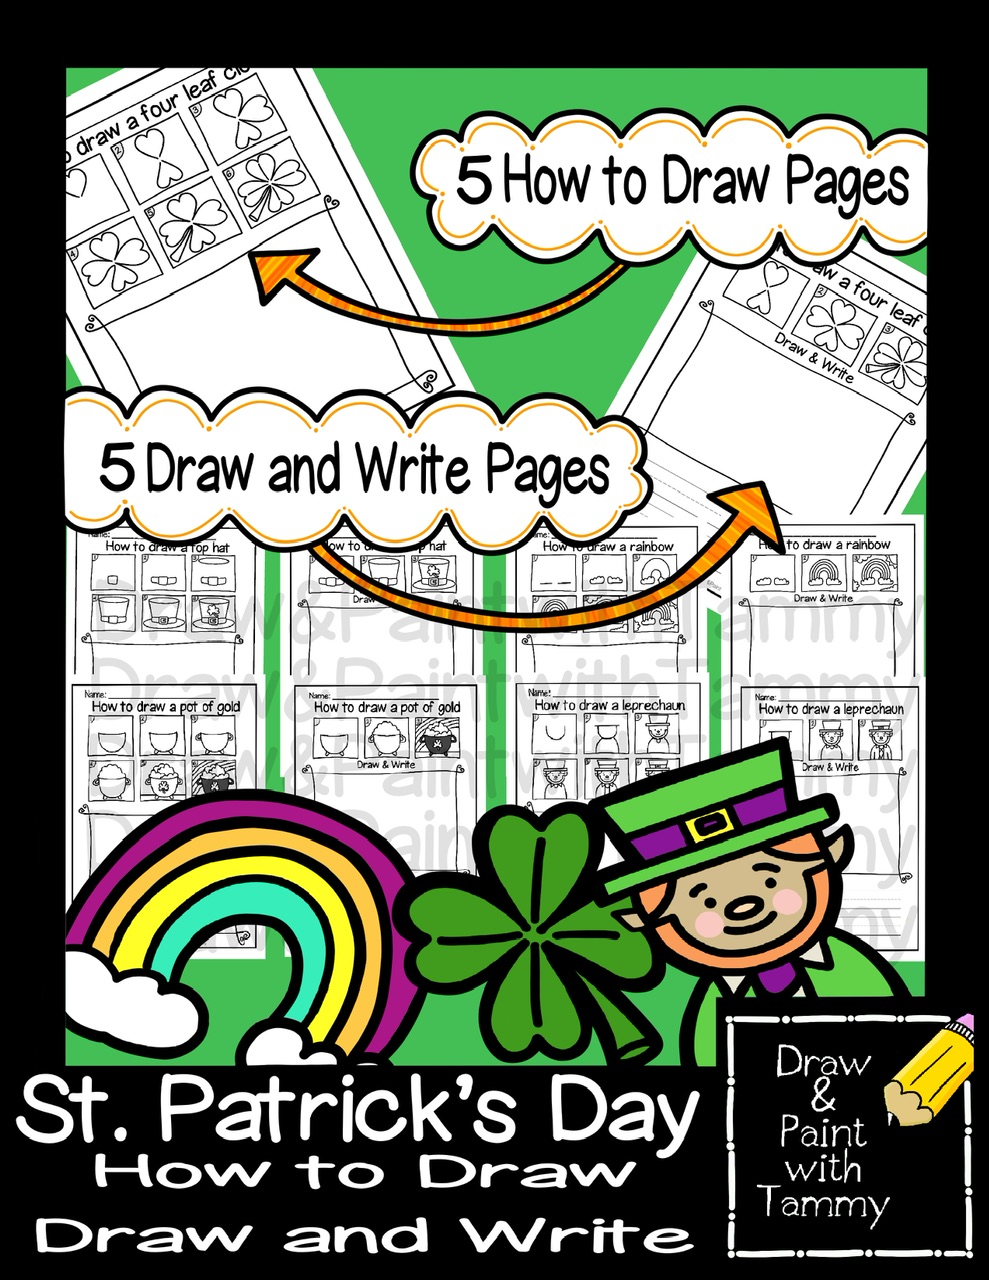 Directed drawings for st patricks day with how to draw and write pages made by teachers